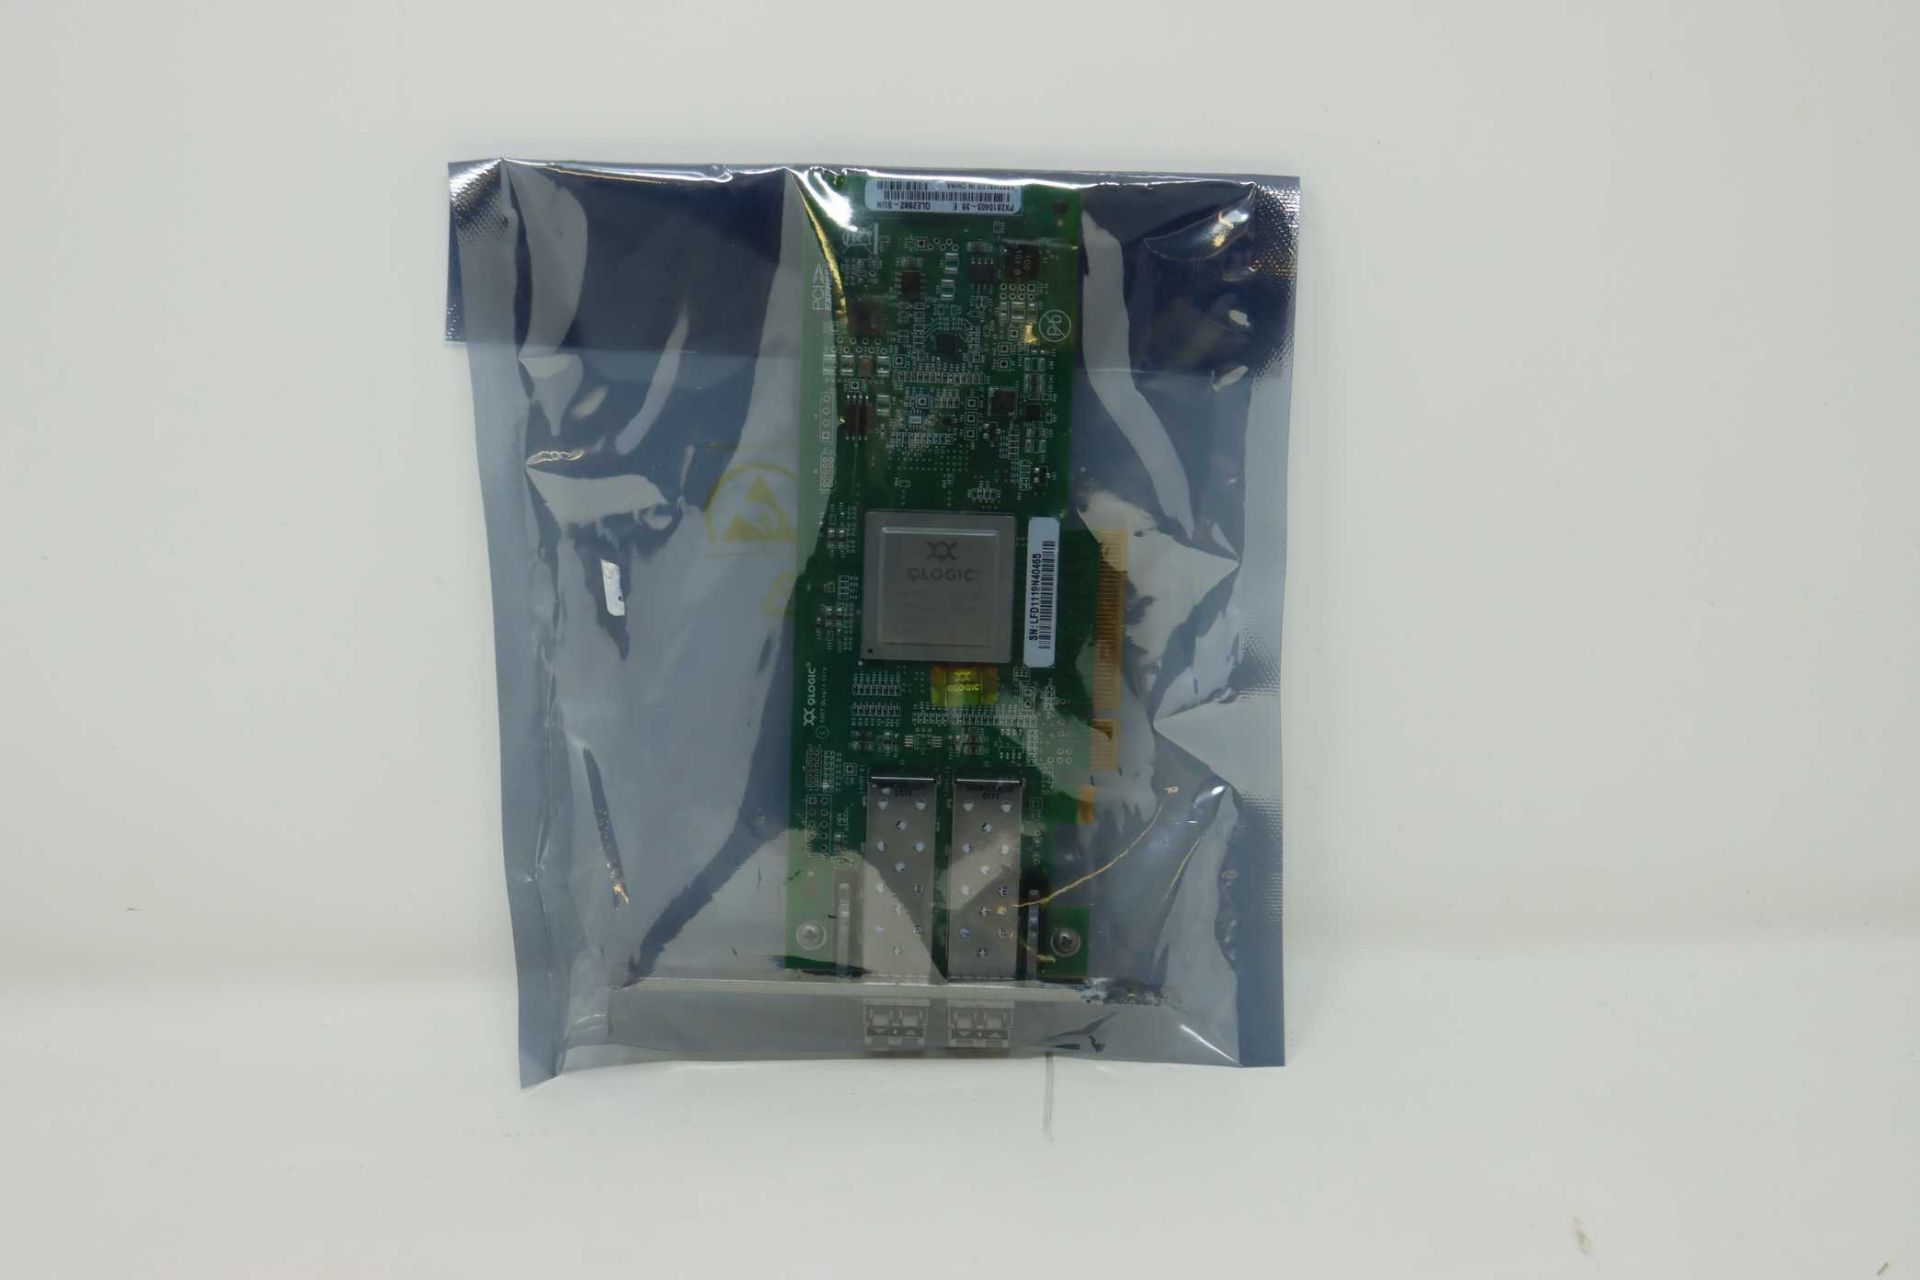 An as new Qlogic QLE2562-SUN Dual Port PCI-E 8GB Fibre Channel Host Bus Adapter (Packaging sealed).